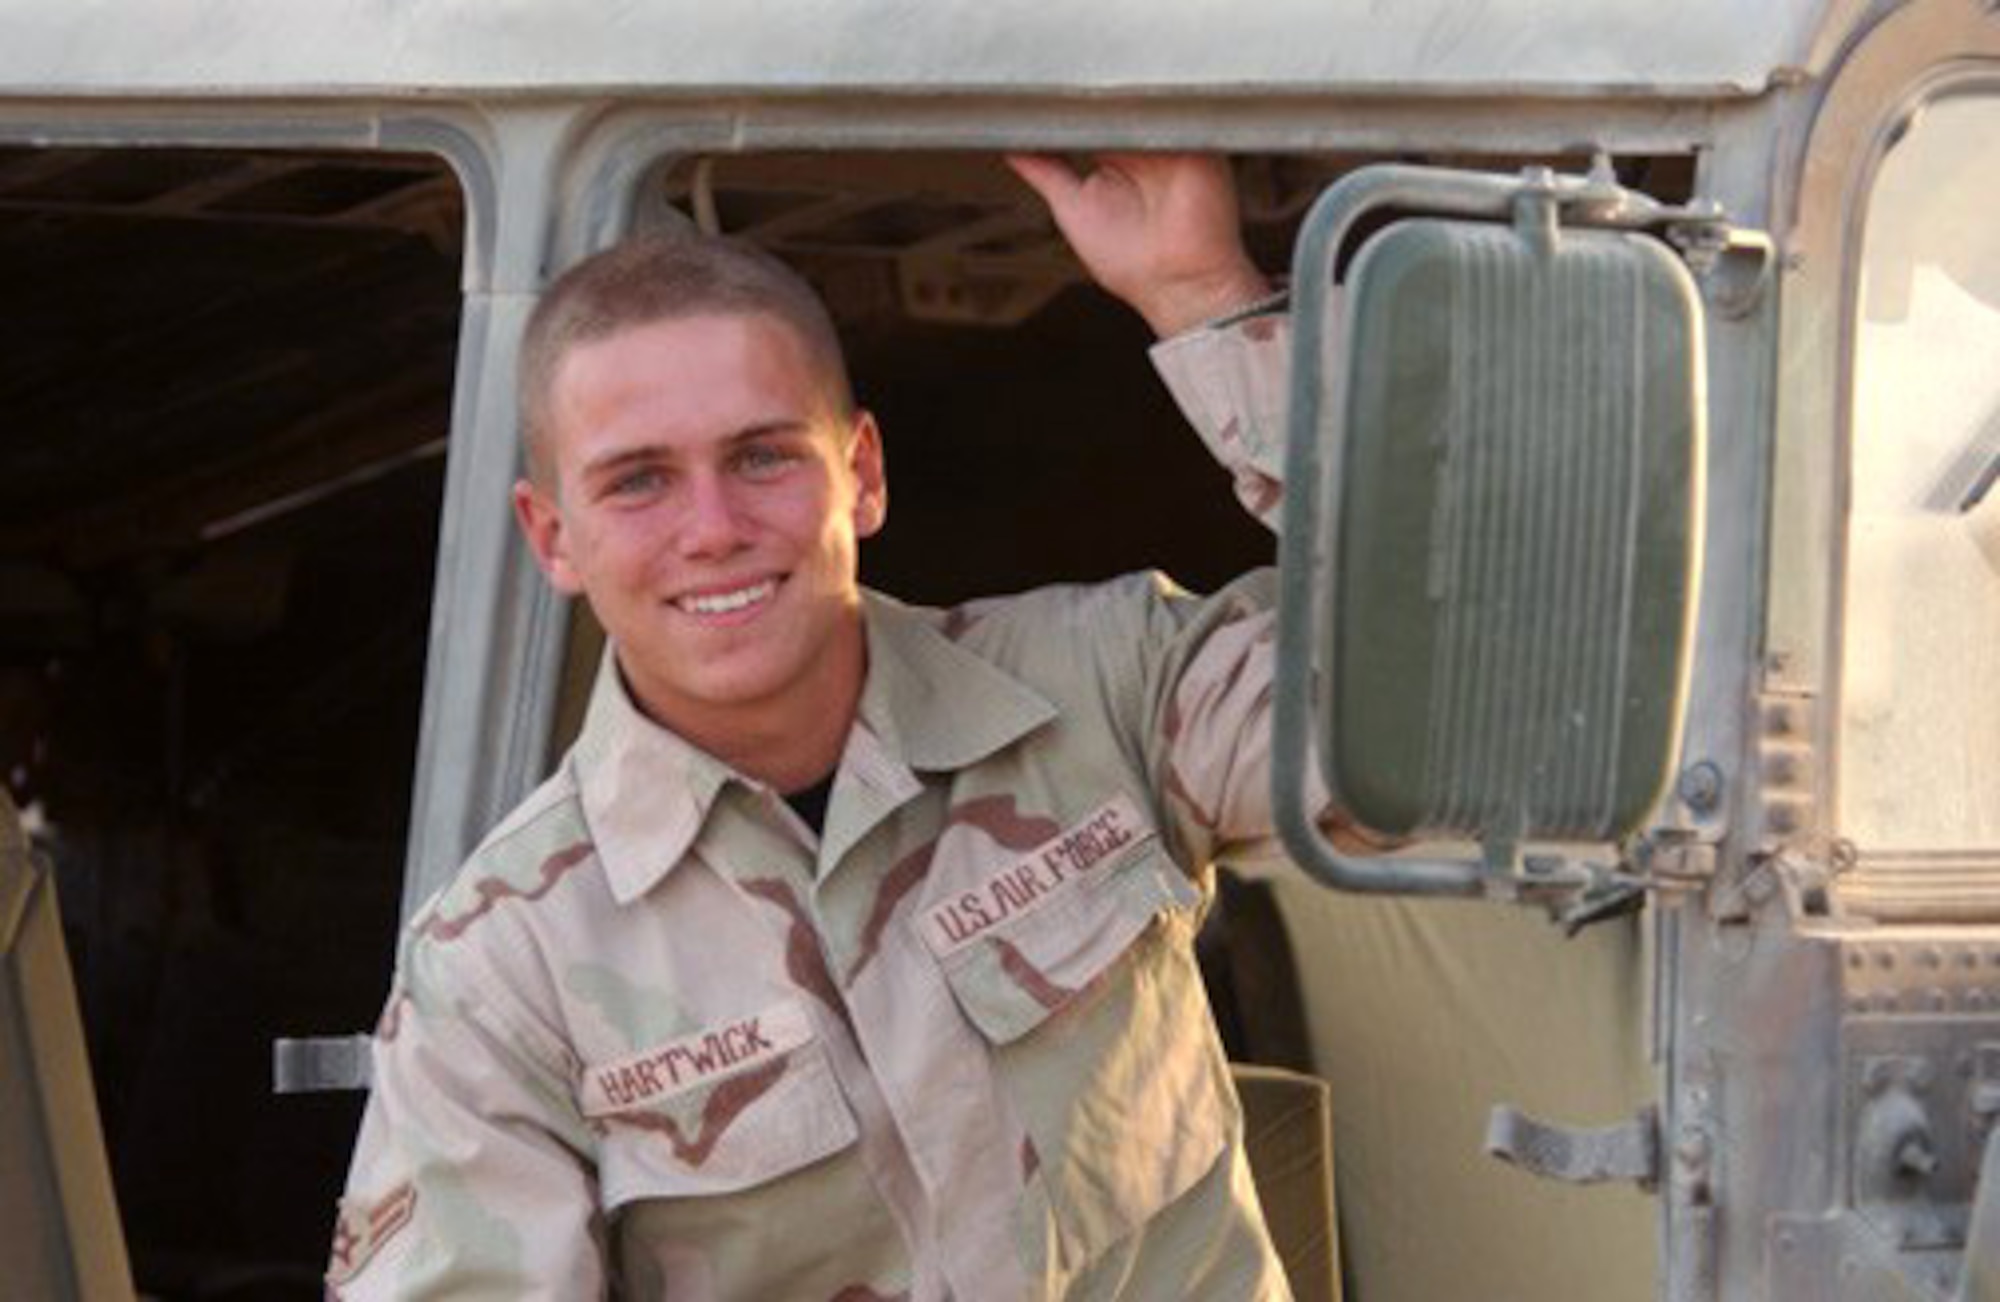 OPERATION IRAQI FREEDOM -- Airman 1st Class Ben Hartwick, a security forces augmentee from the 405th Expeditionary Civil Engineer Squadron, is a first-time participant in the MTV reality series "MTV Diaries."  (U.S. Air Force photo by Staff Sgt. Cherie Thurlby)